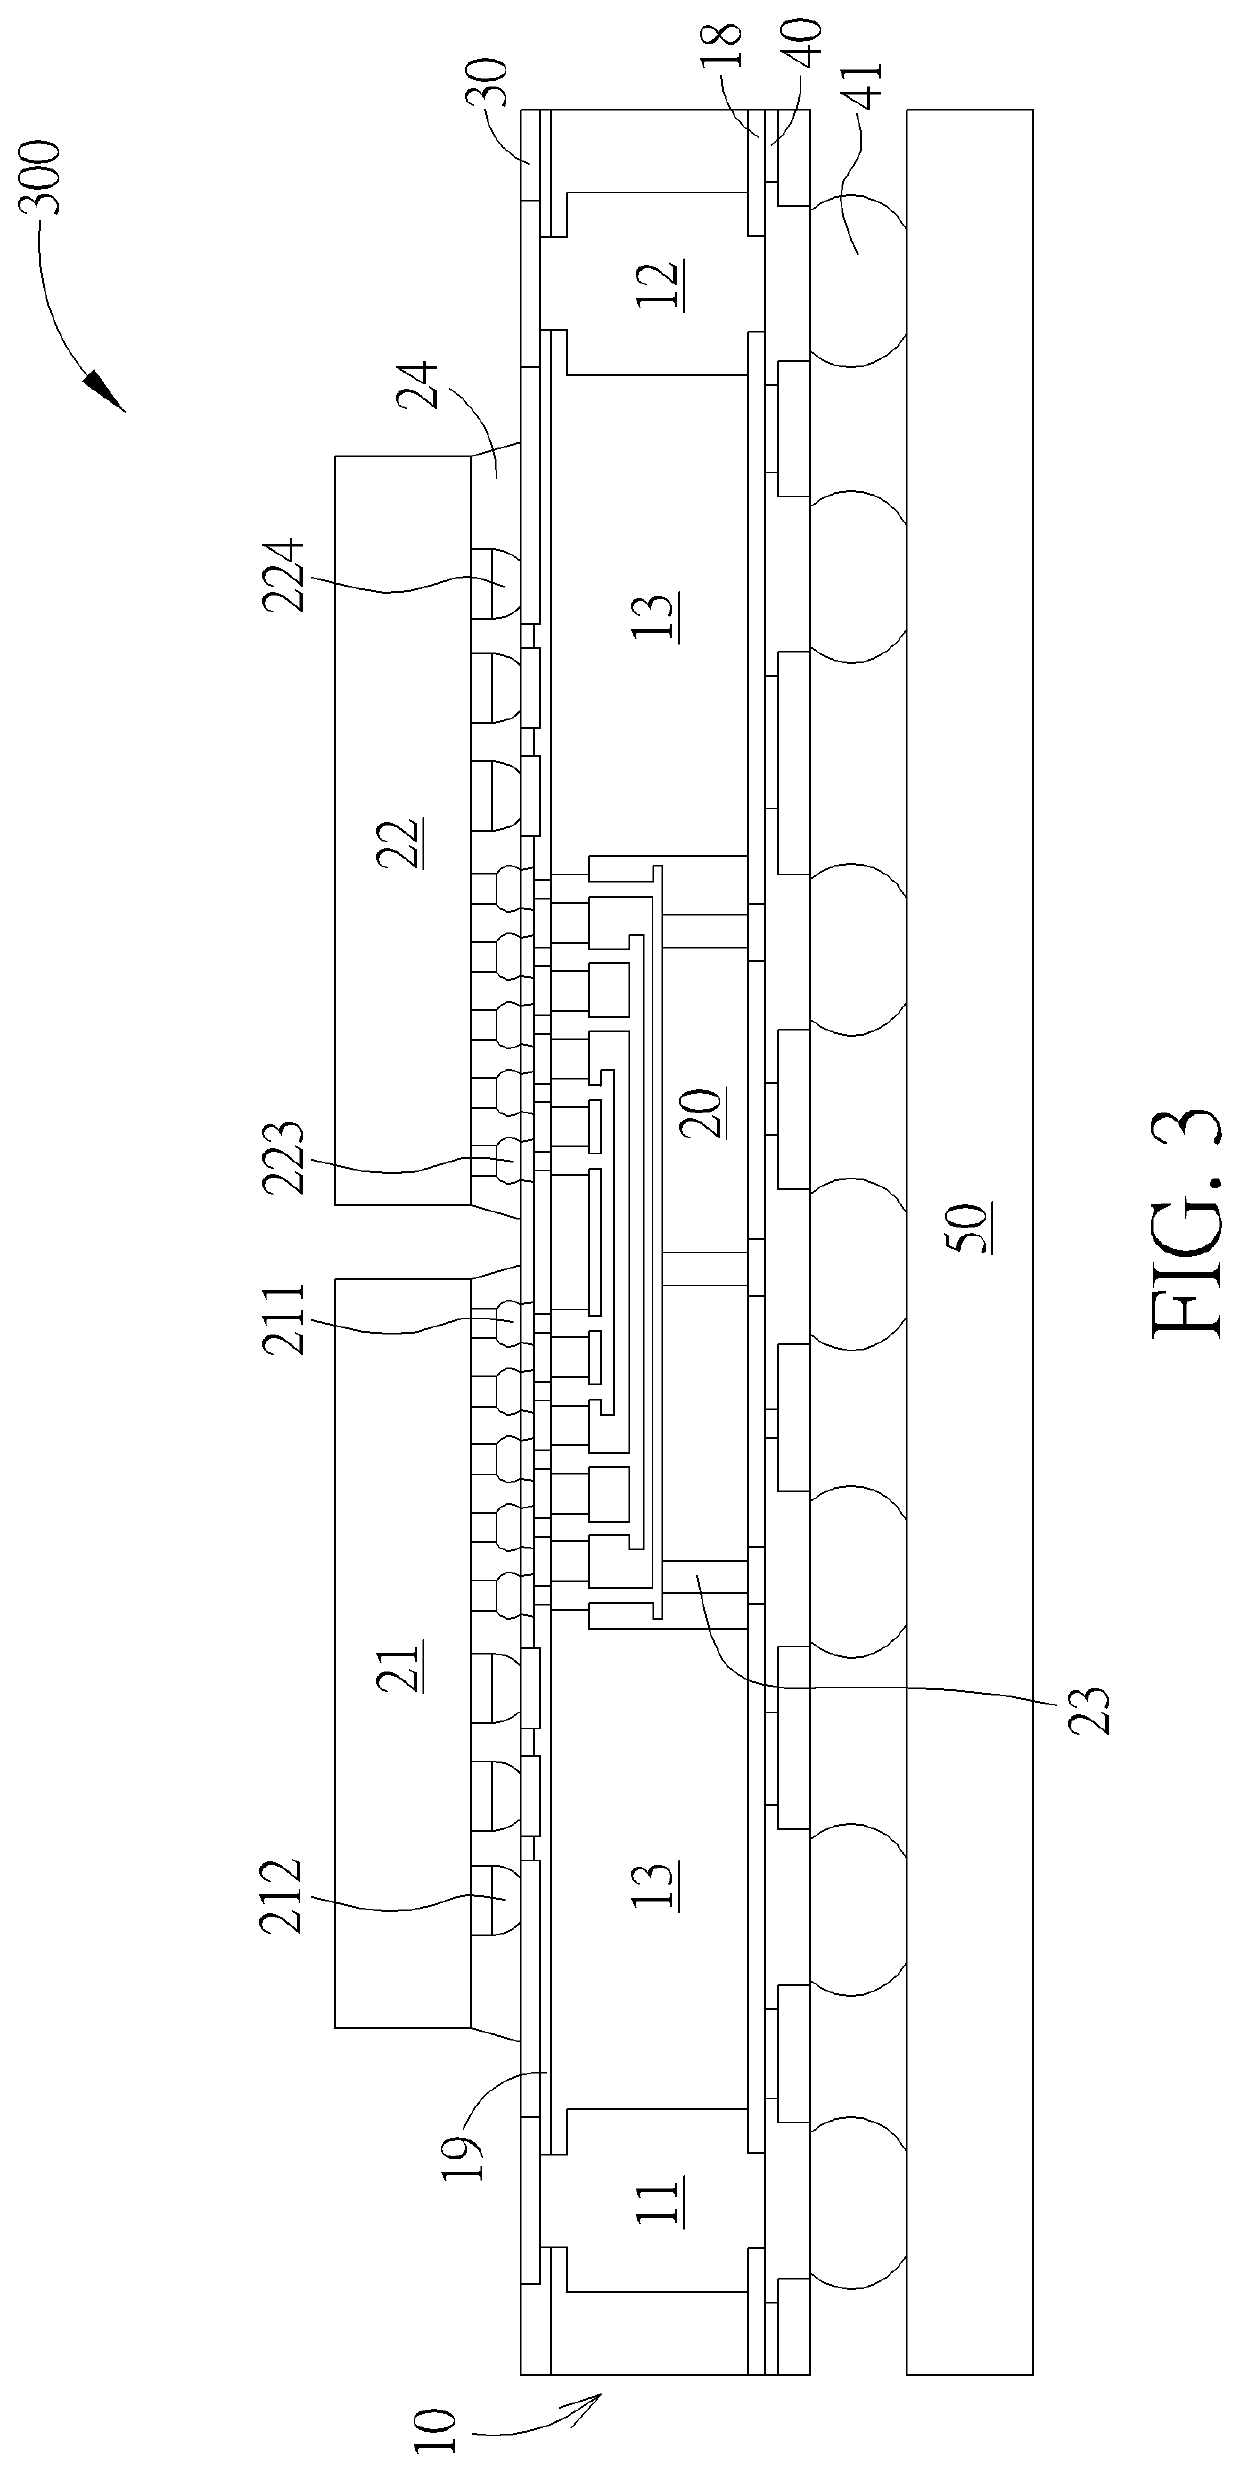 Chip package structure using silicon interposer as interconnection bridge